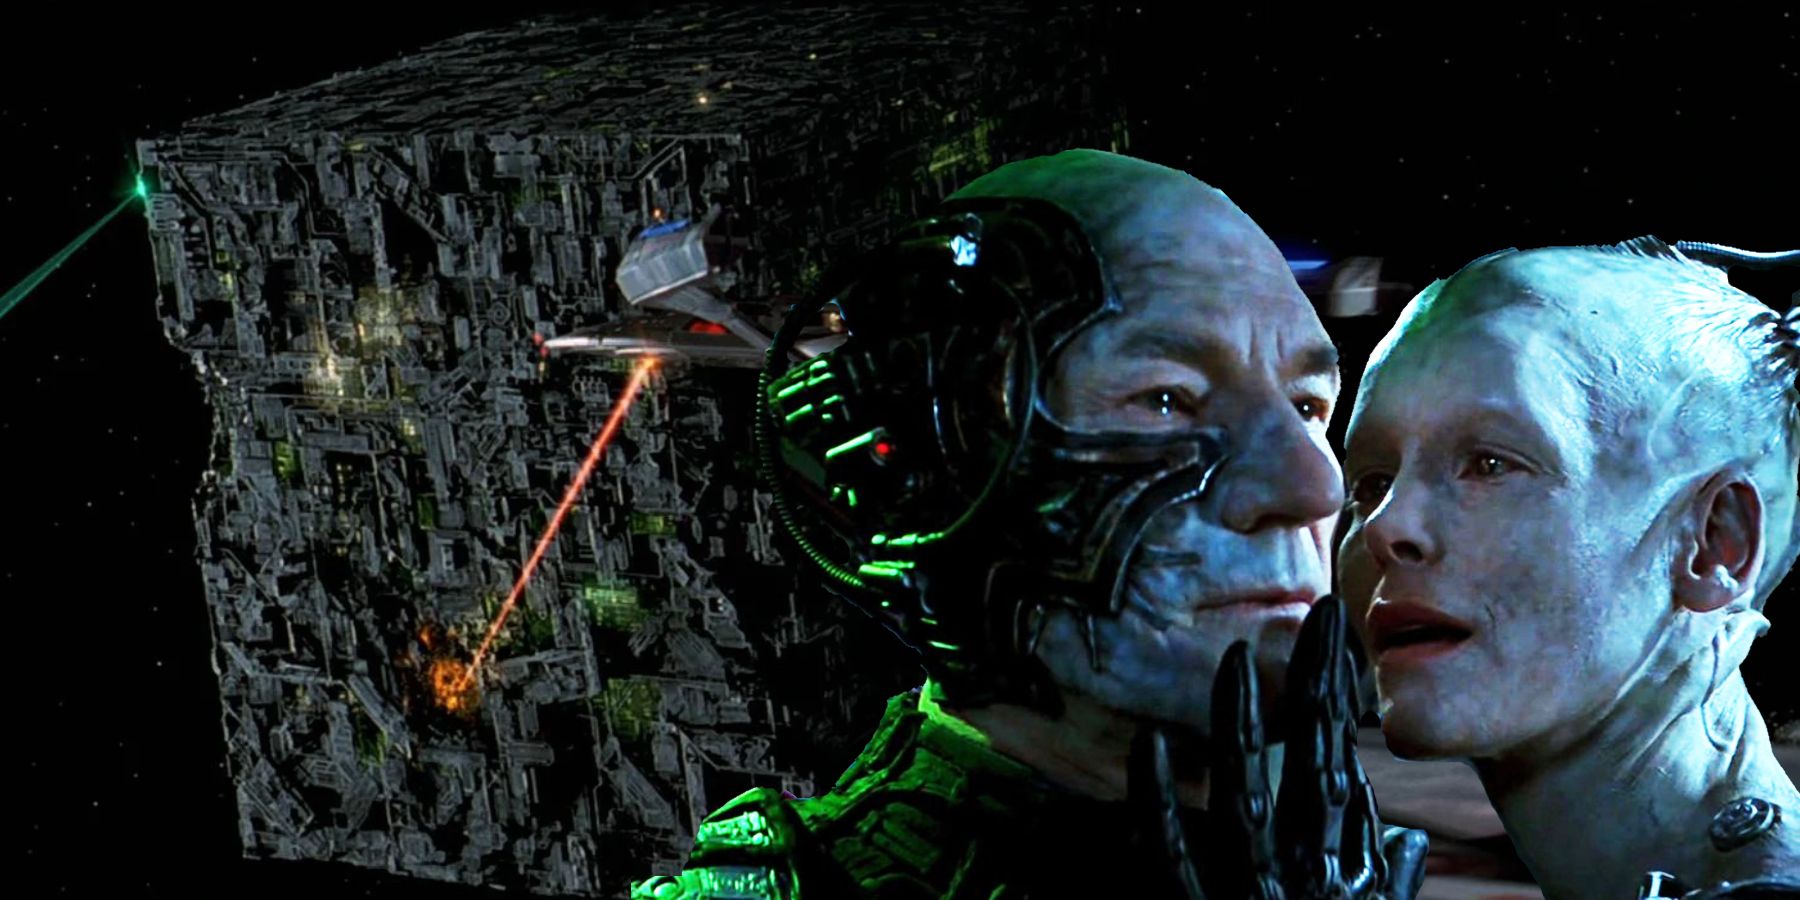 Locutus and the Borg Queen in Star Trek: First Contact